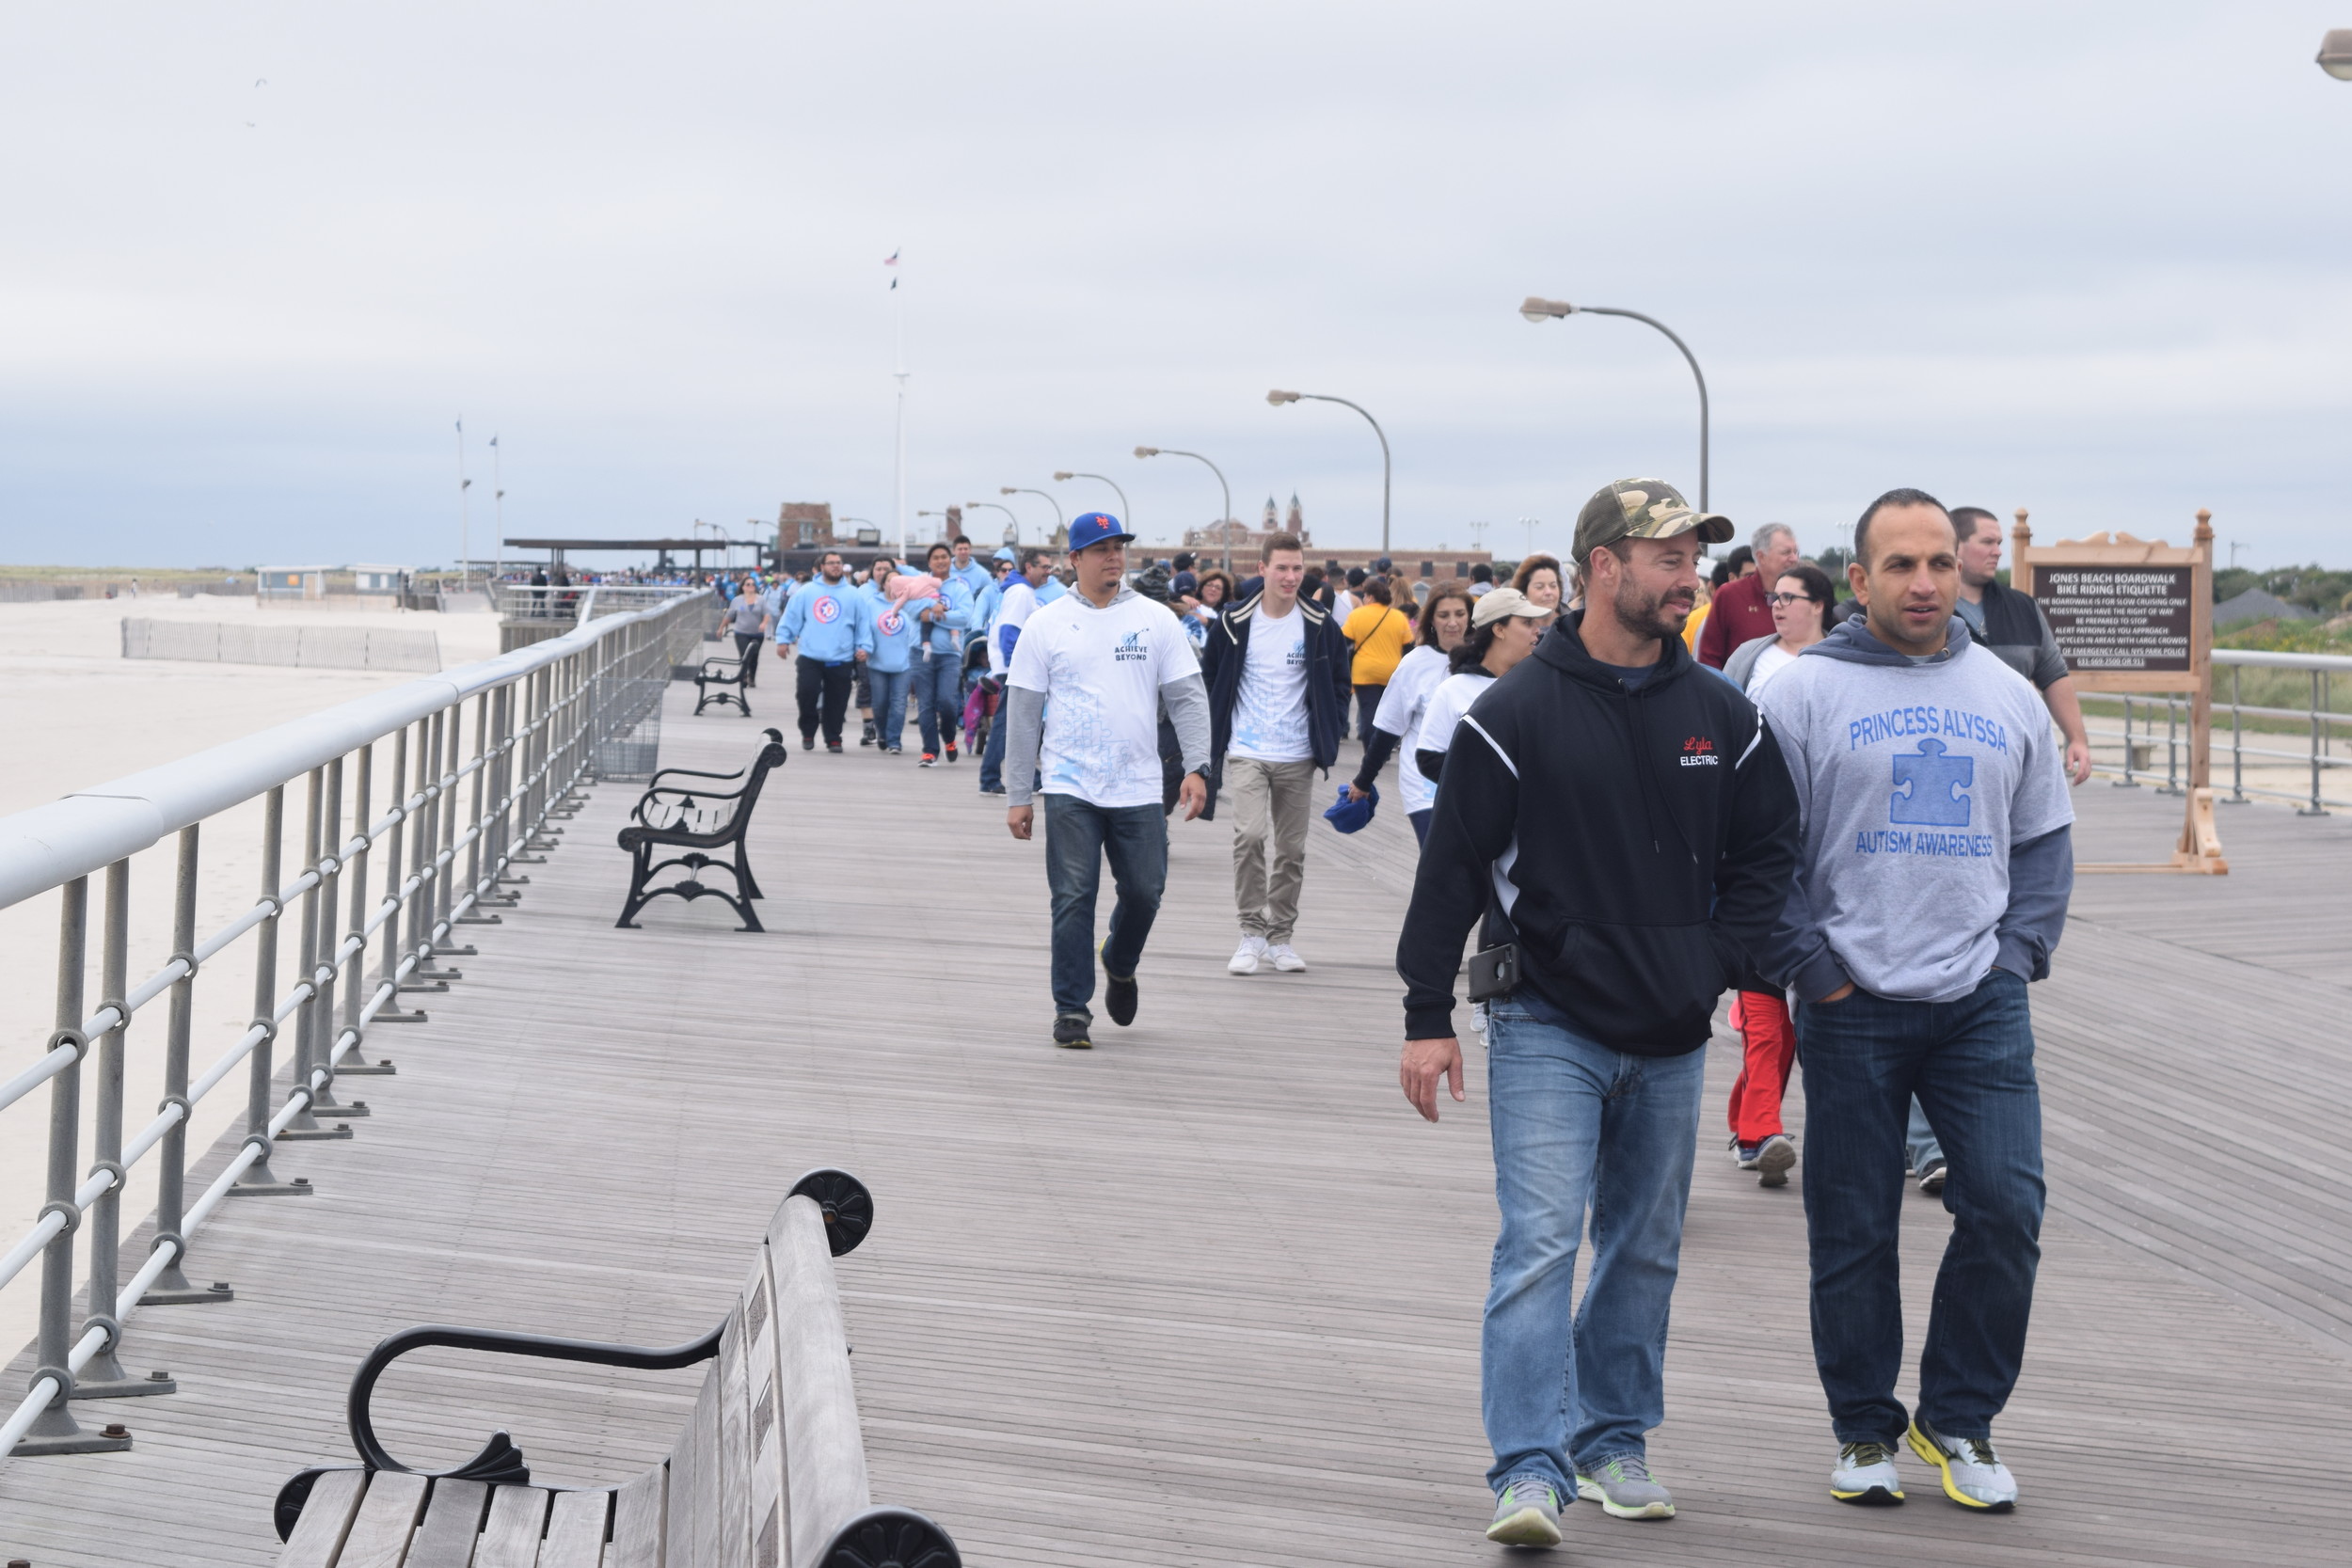 Last year’s Autism Speaks Walk drew thousands of people from all over.